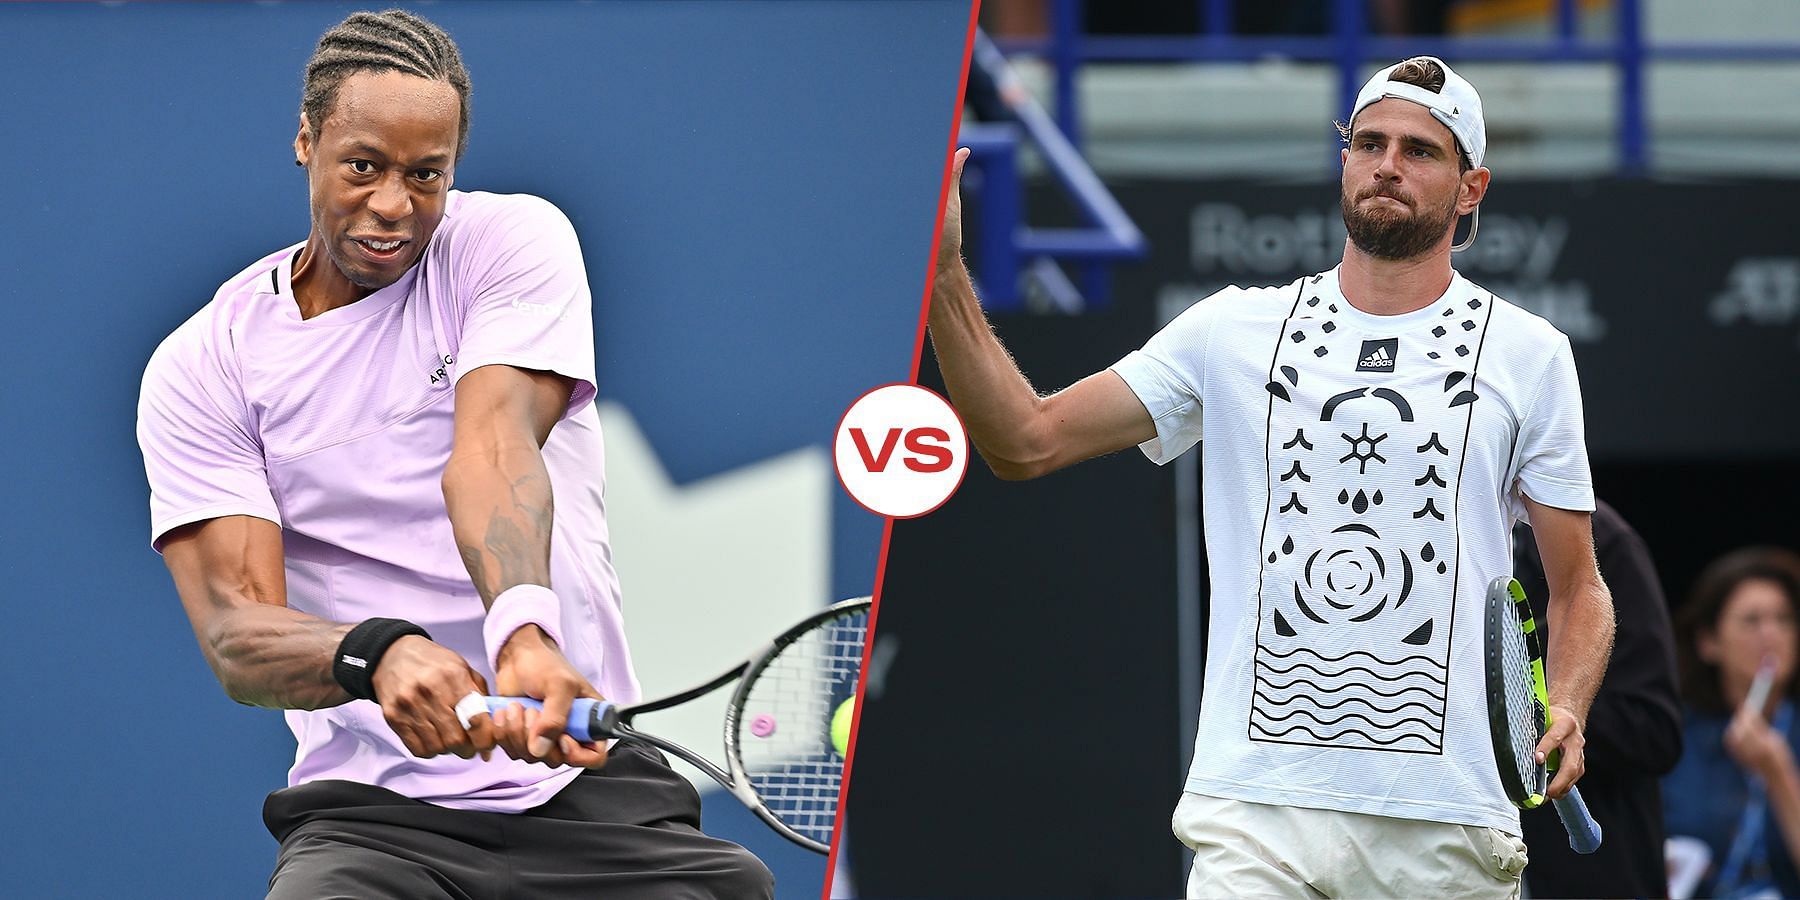 Canadian Open 2022 Gael Monfils vs Maxime Cressy preview, head-to-head and prediction, ods and pick